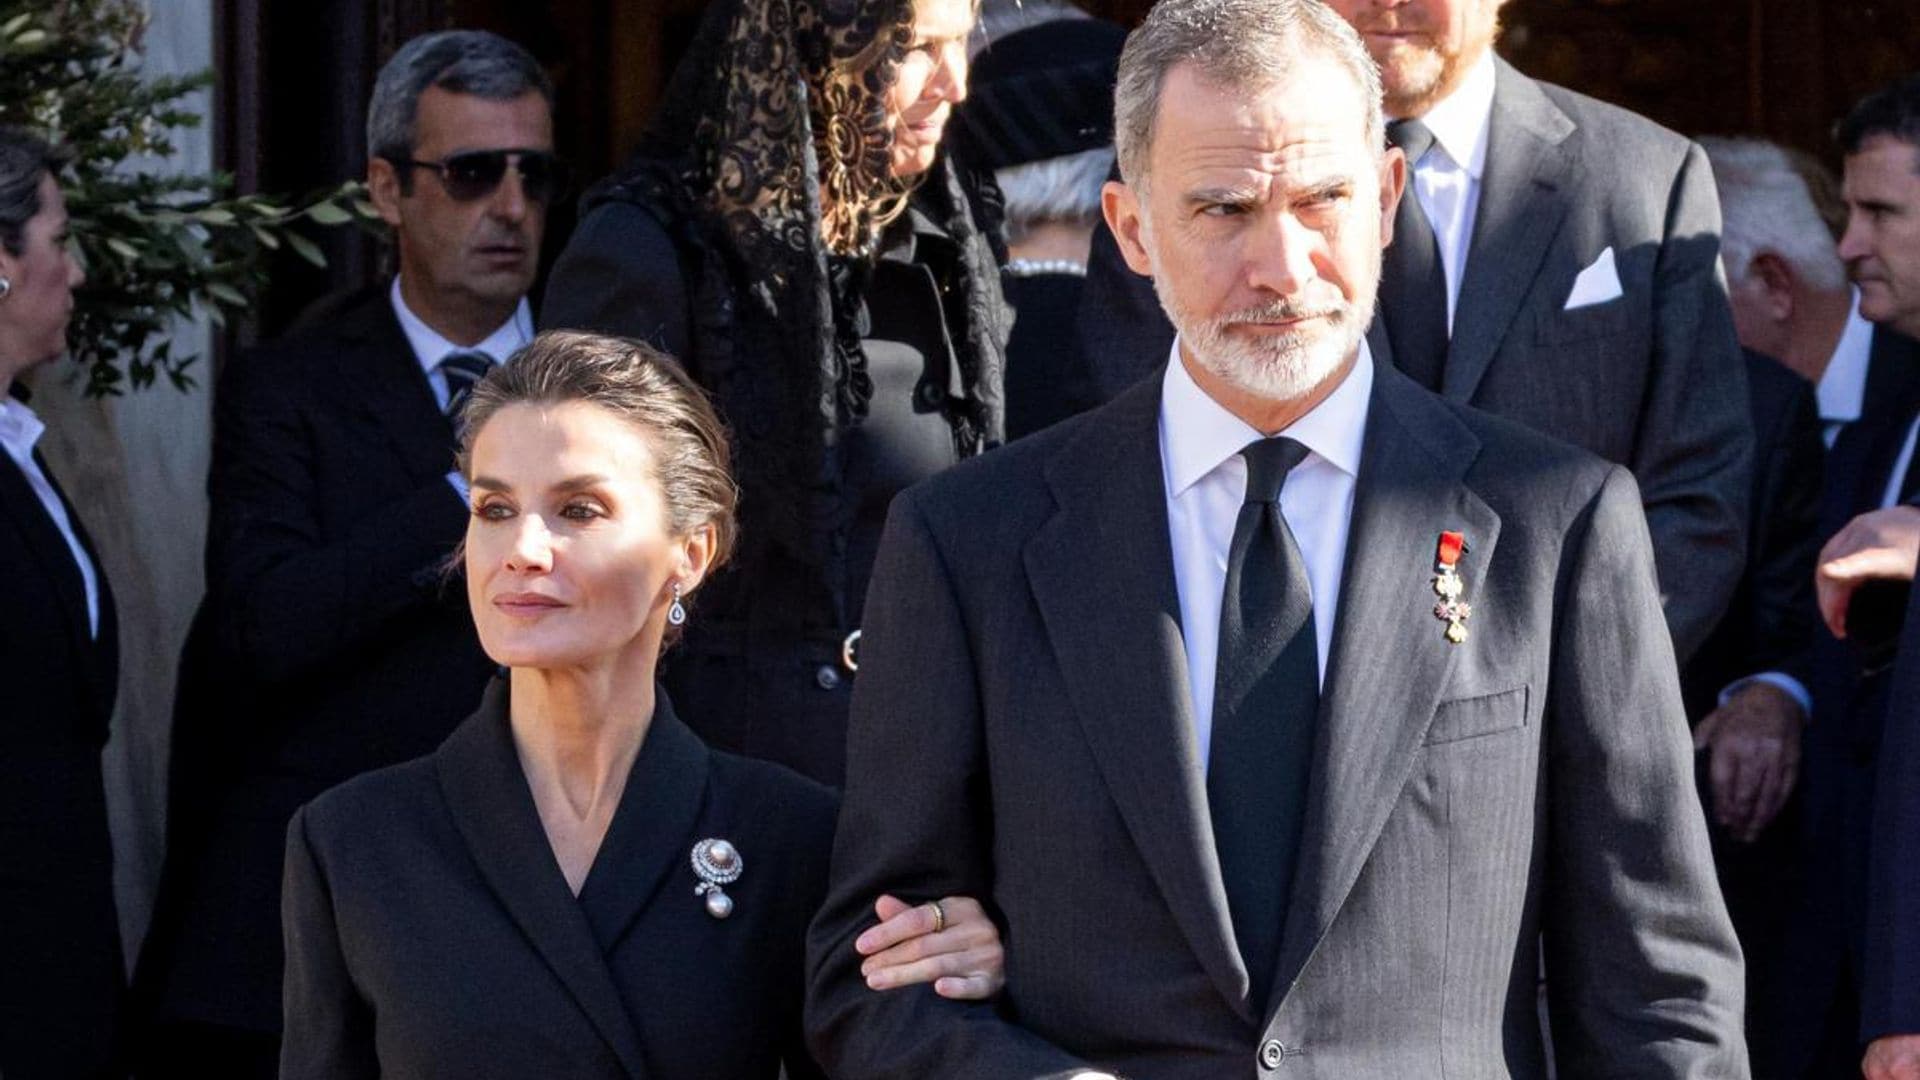 Queen Letizia and King Felipe mourn death of family member